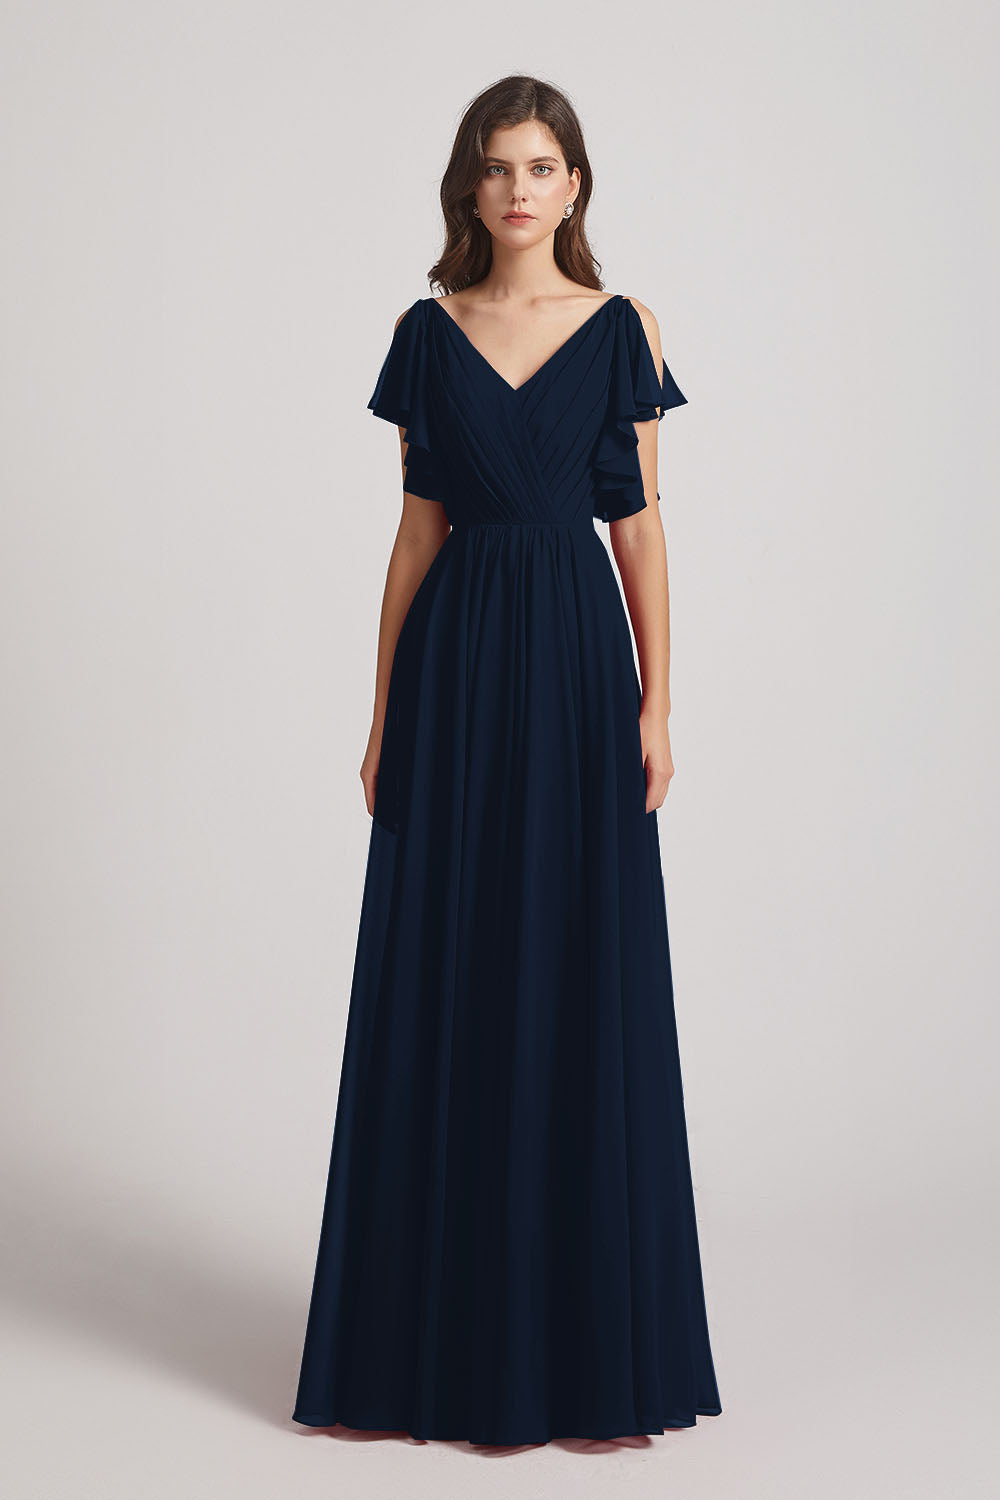 Alfa Bridal Dark Navy V-Neck Pleated Chiffon Bridesmaid Dresses with Open Flutter Sleeves (AF0098)